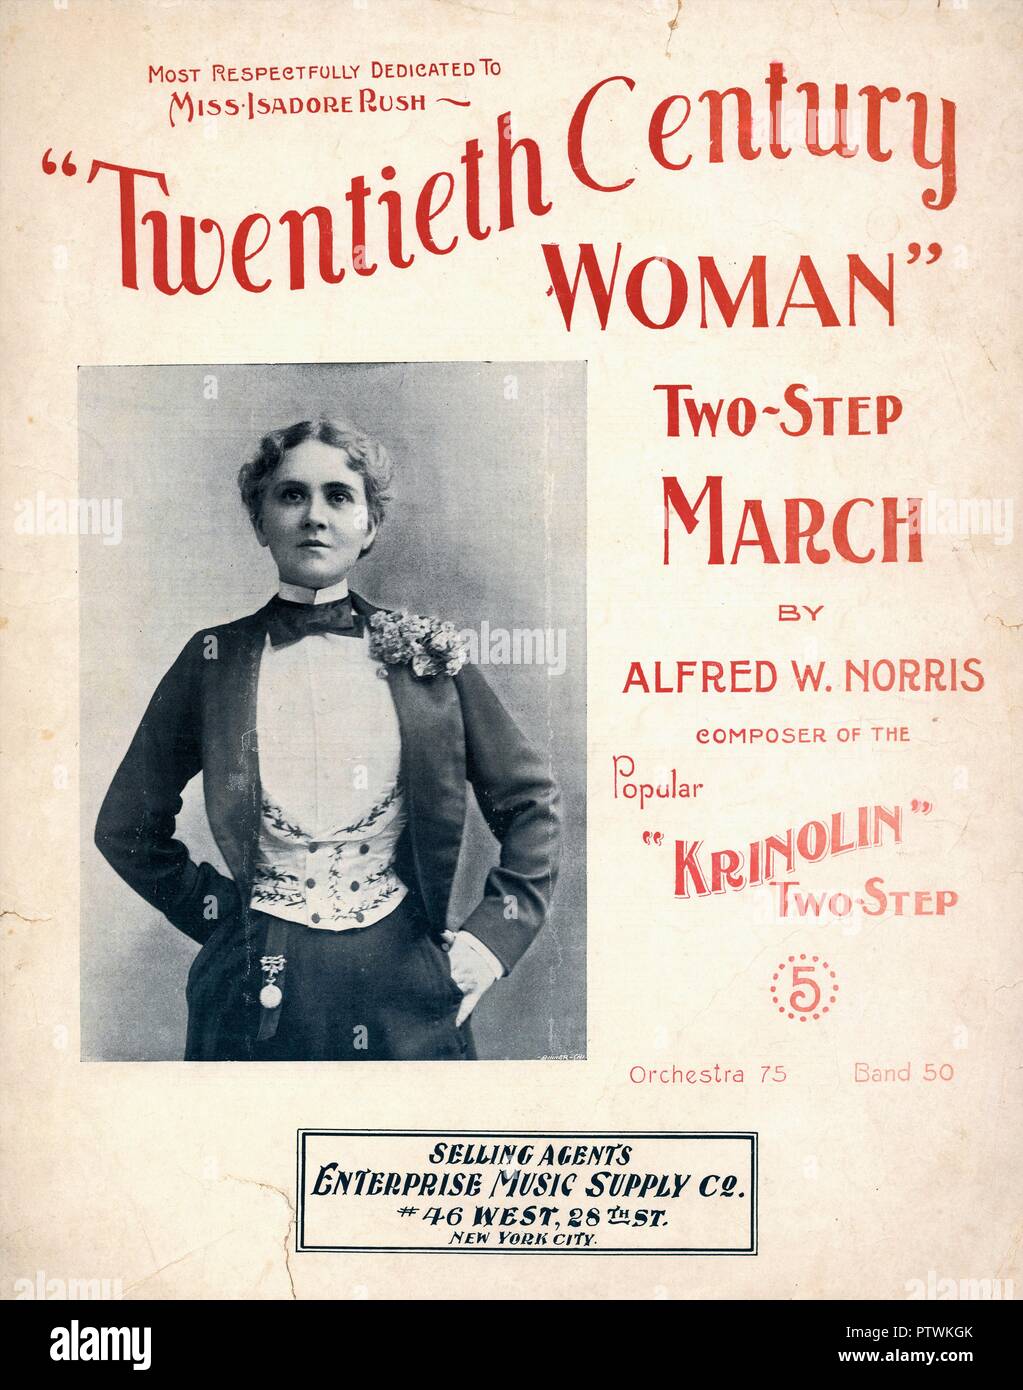 Sheet music cover for Alfred W Norris' suffrage-era song 'Twentieth Century Woman,' with a photograph of stage actress Isadore Rush, from the waist up, garbed in the 'New Woman' fashion of a male jacket, bow tie, vest, and trousers, published in New York City, by the Enterprise Music Supply Company, for the American market, 1896. () Stock Photo